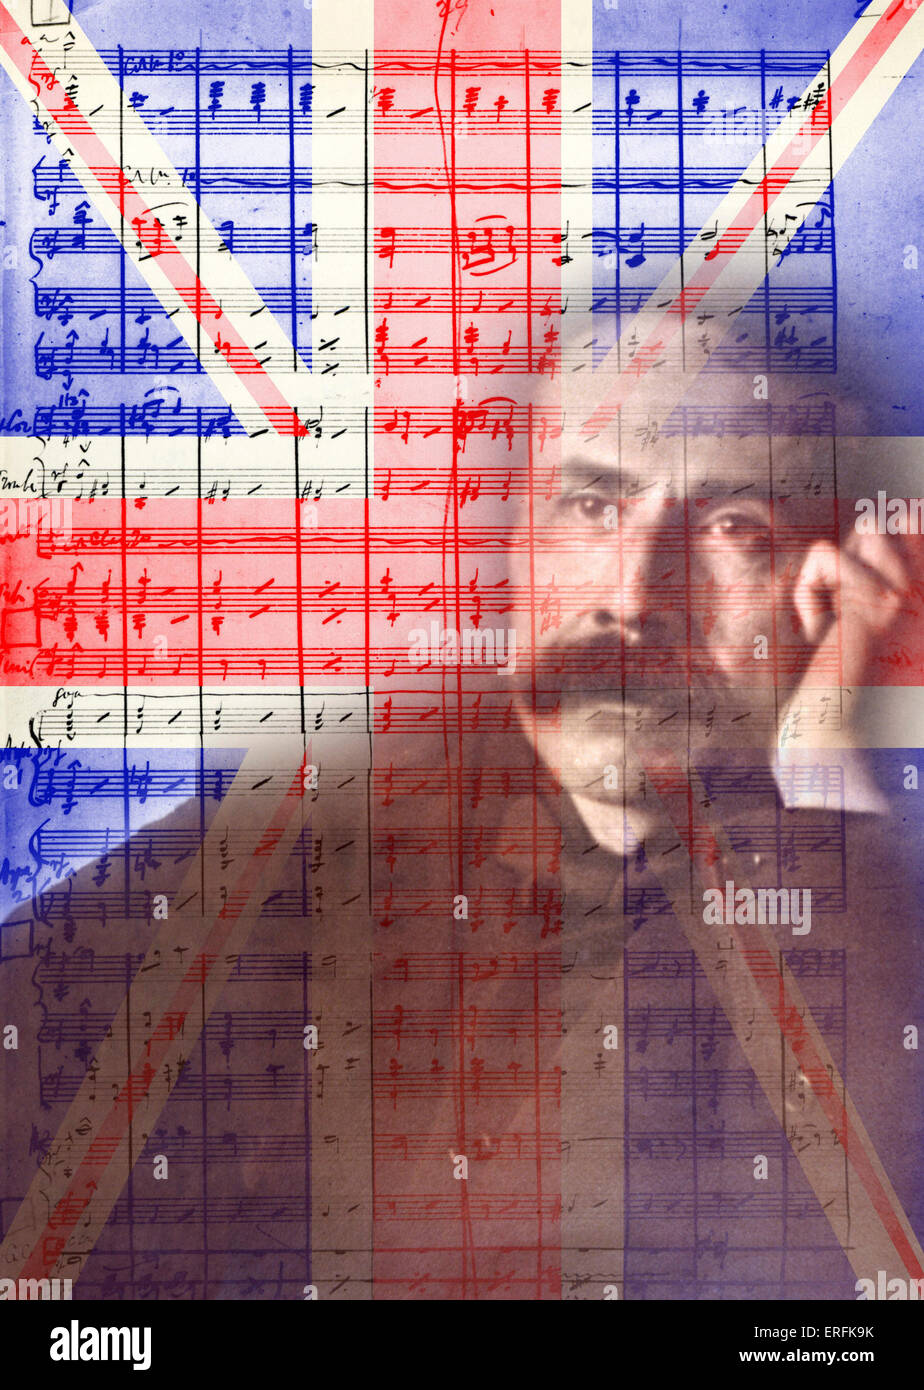 Edward Elgar - Pomp and Circumstance composition. Anniversary composite photo. English composer, 2 June 1857 -23 February 1934. Stock Photo